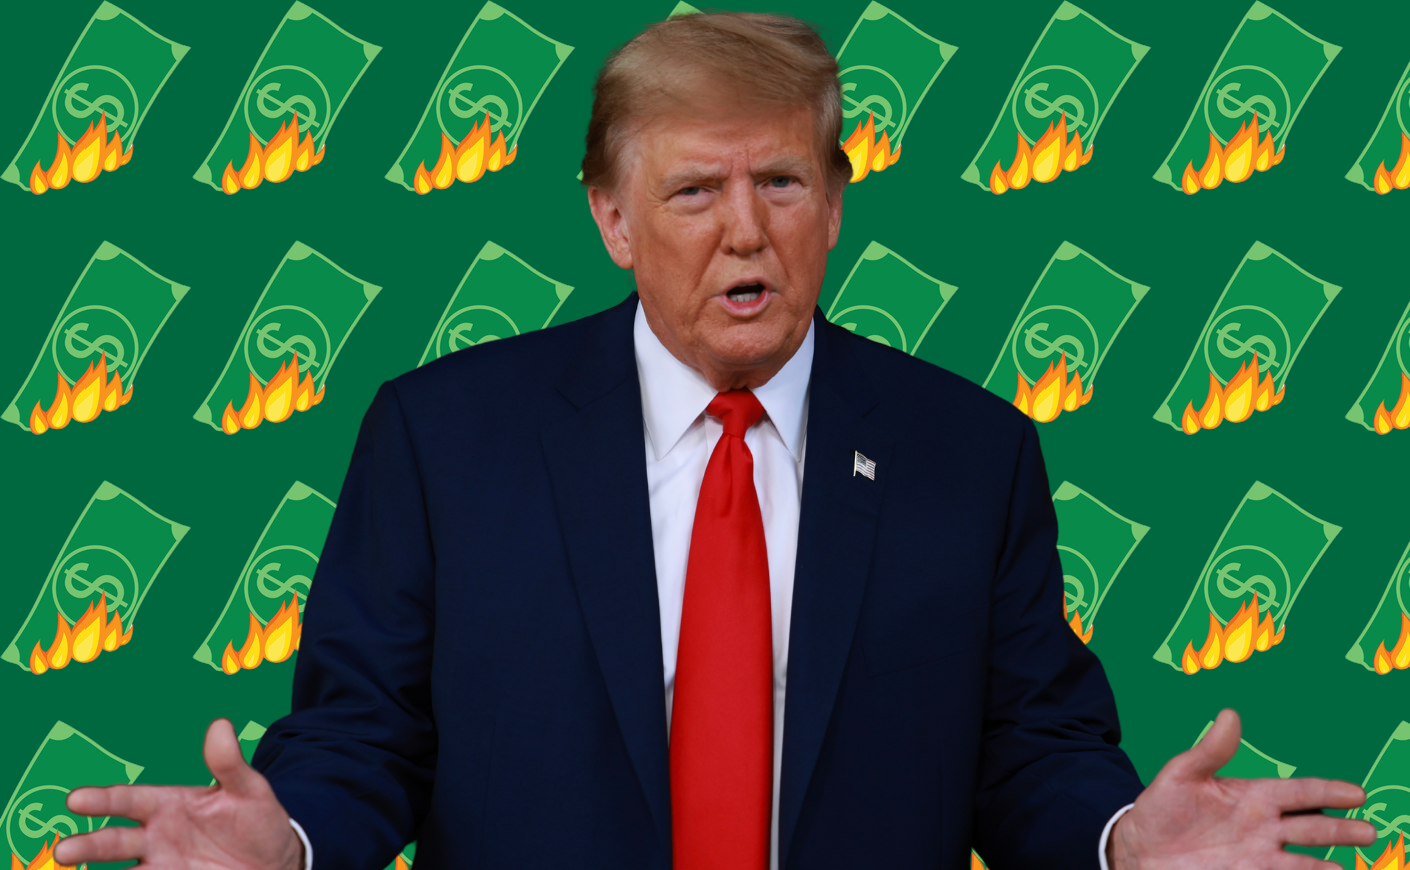 Donald Trump in front of illustrations of burning money